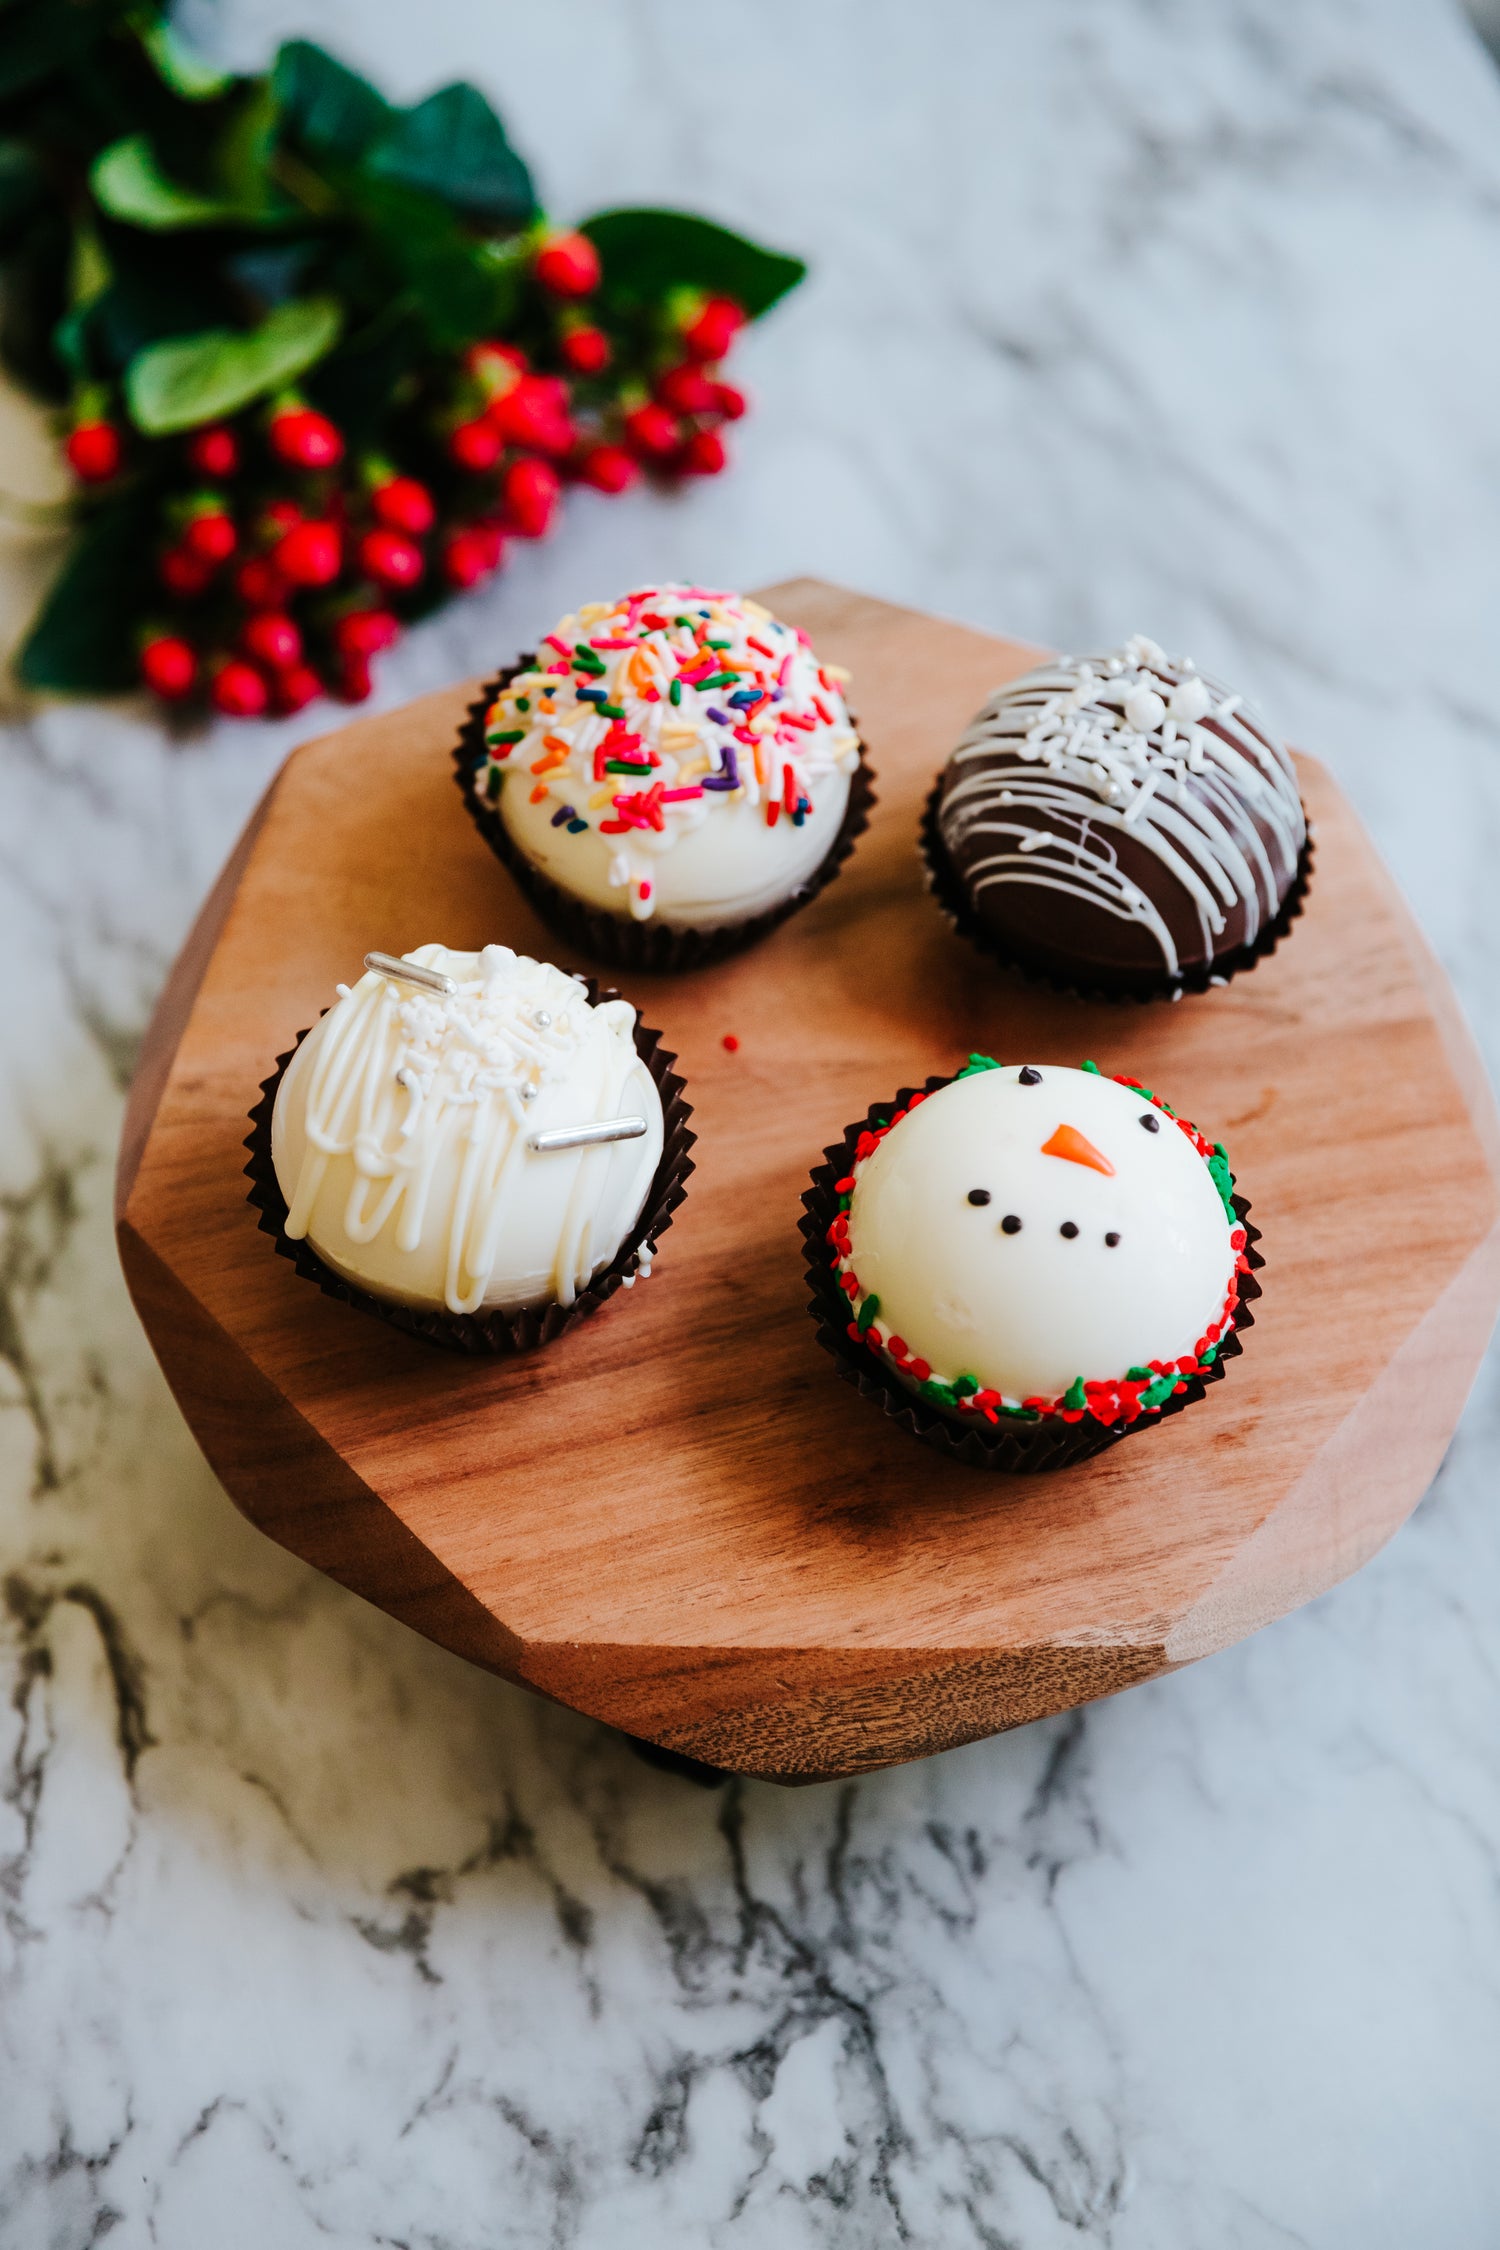 Lifestyle image of 4 decorated hot cocoa bombs